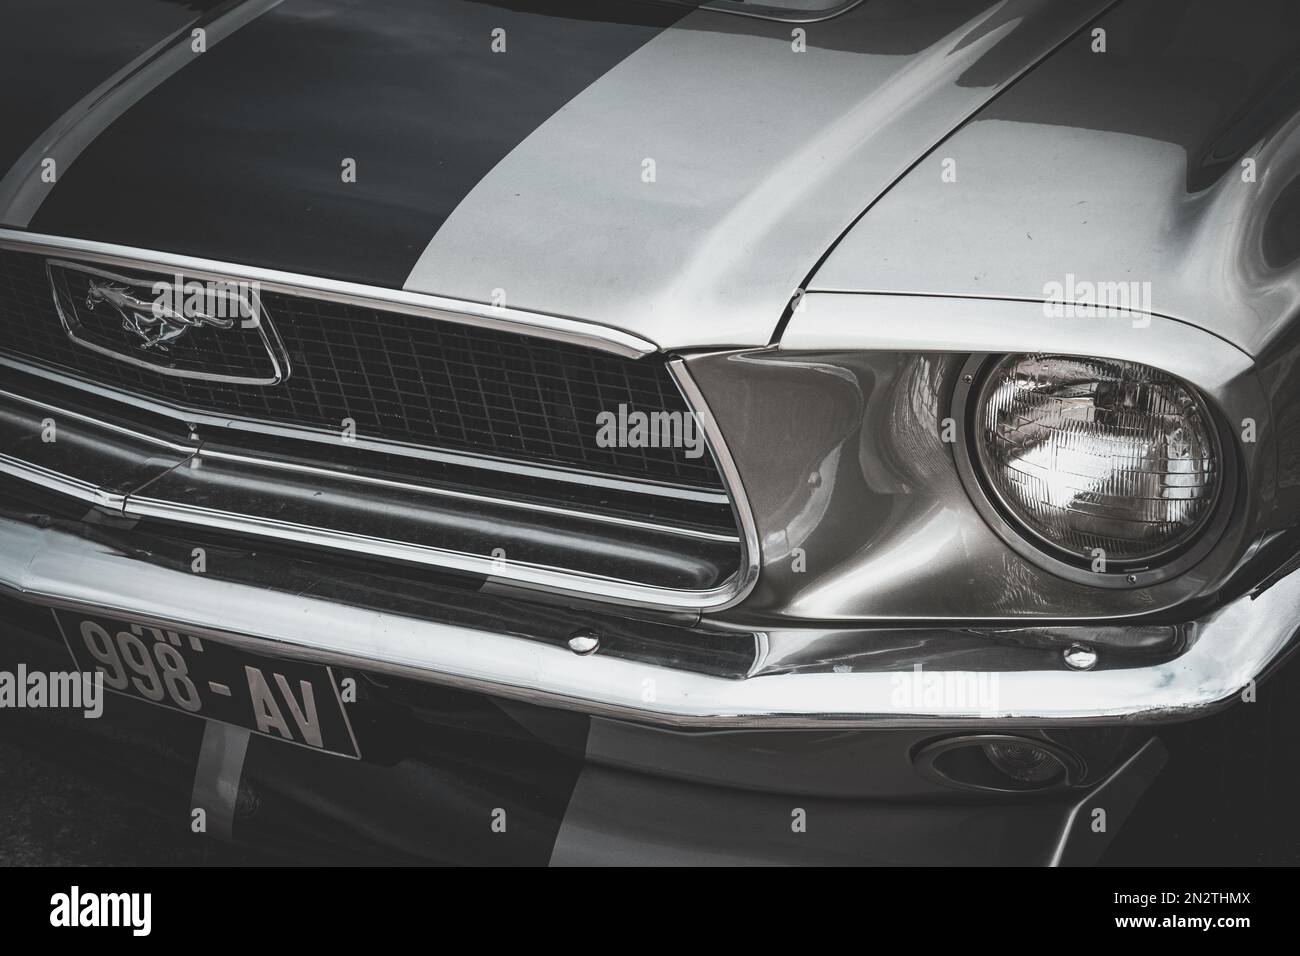 Mustang Muscle Car Stock Photo